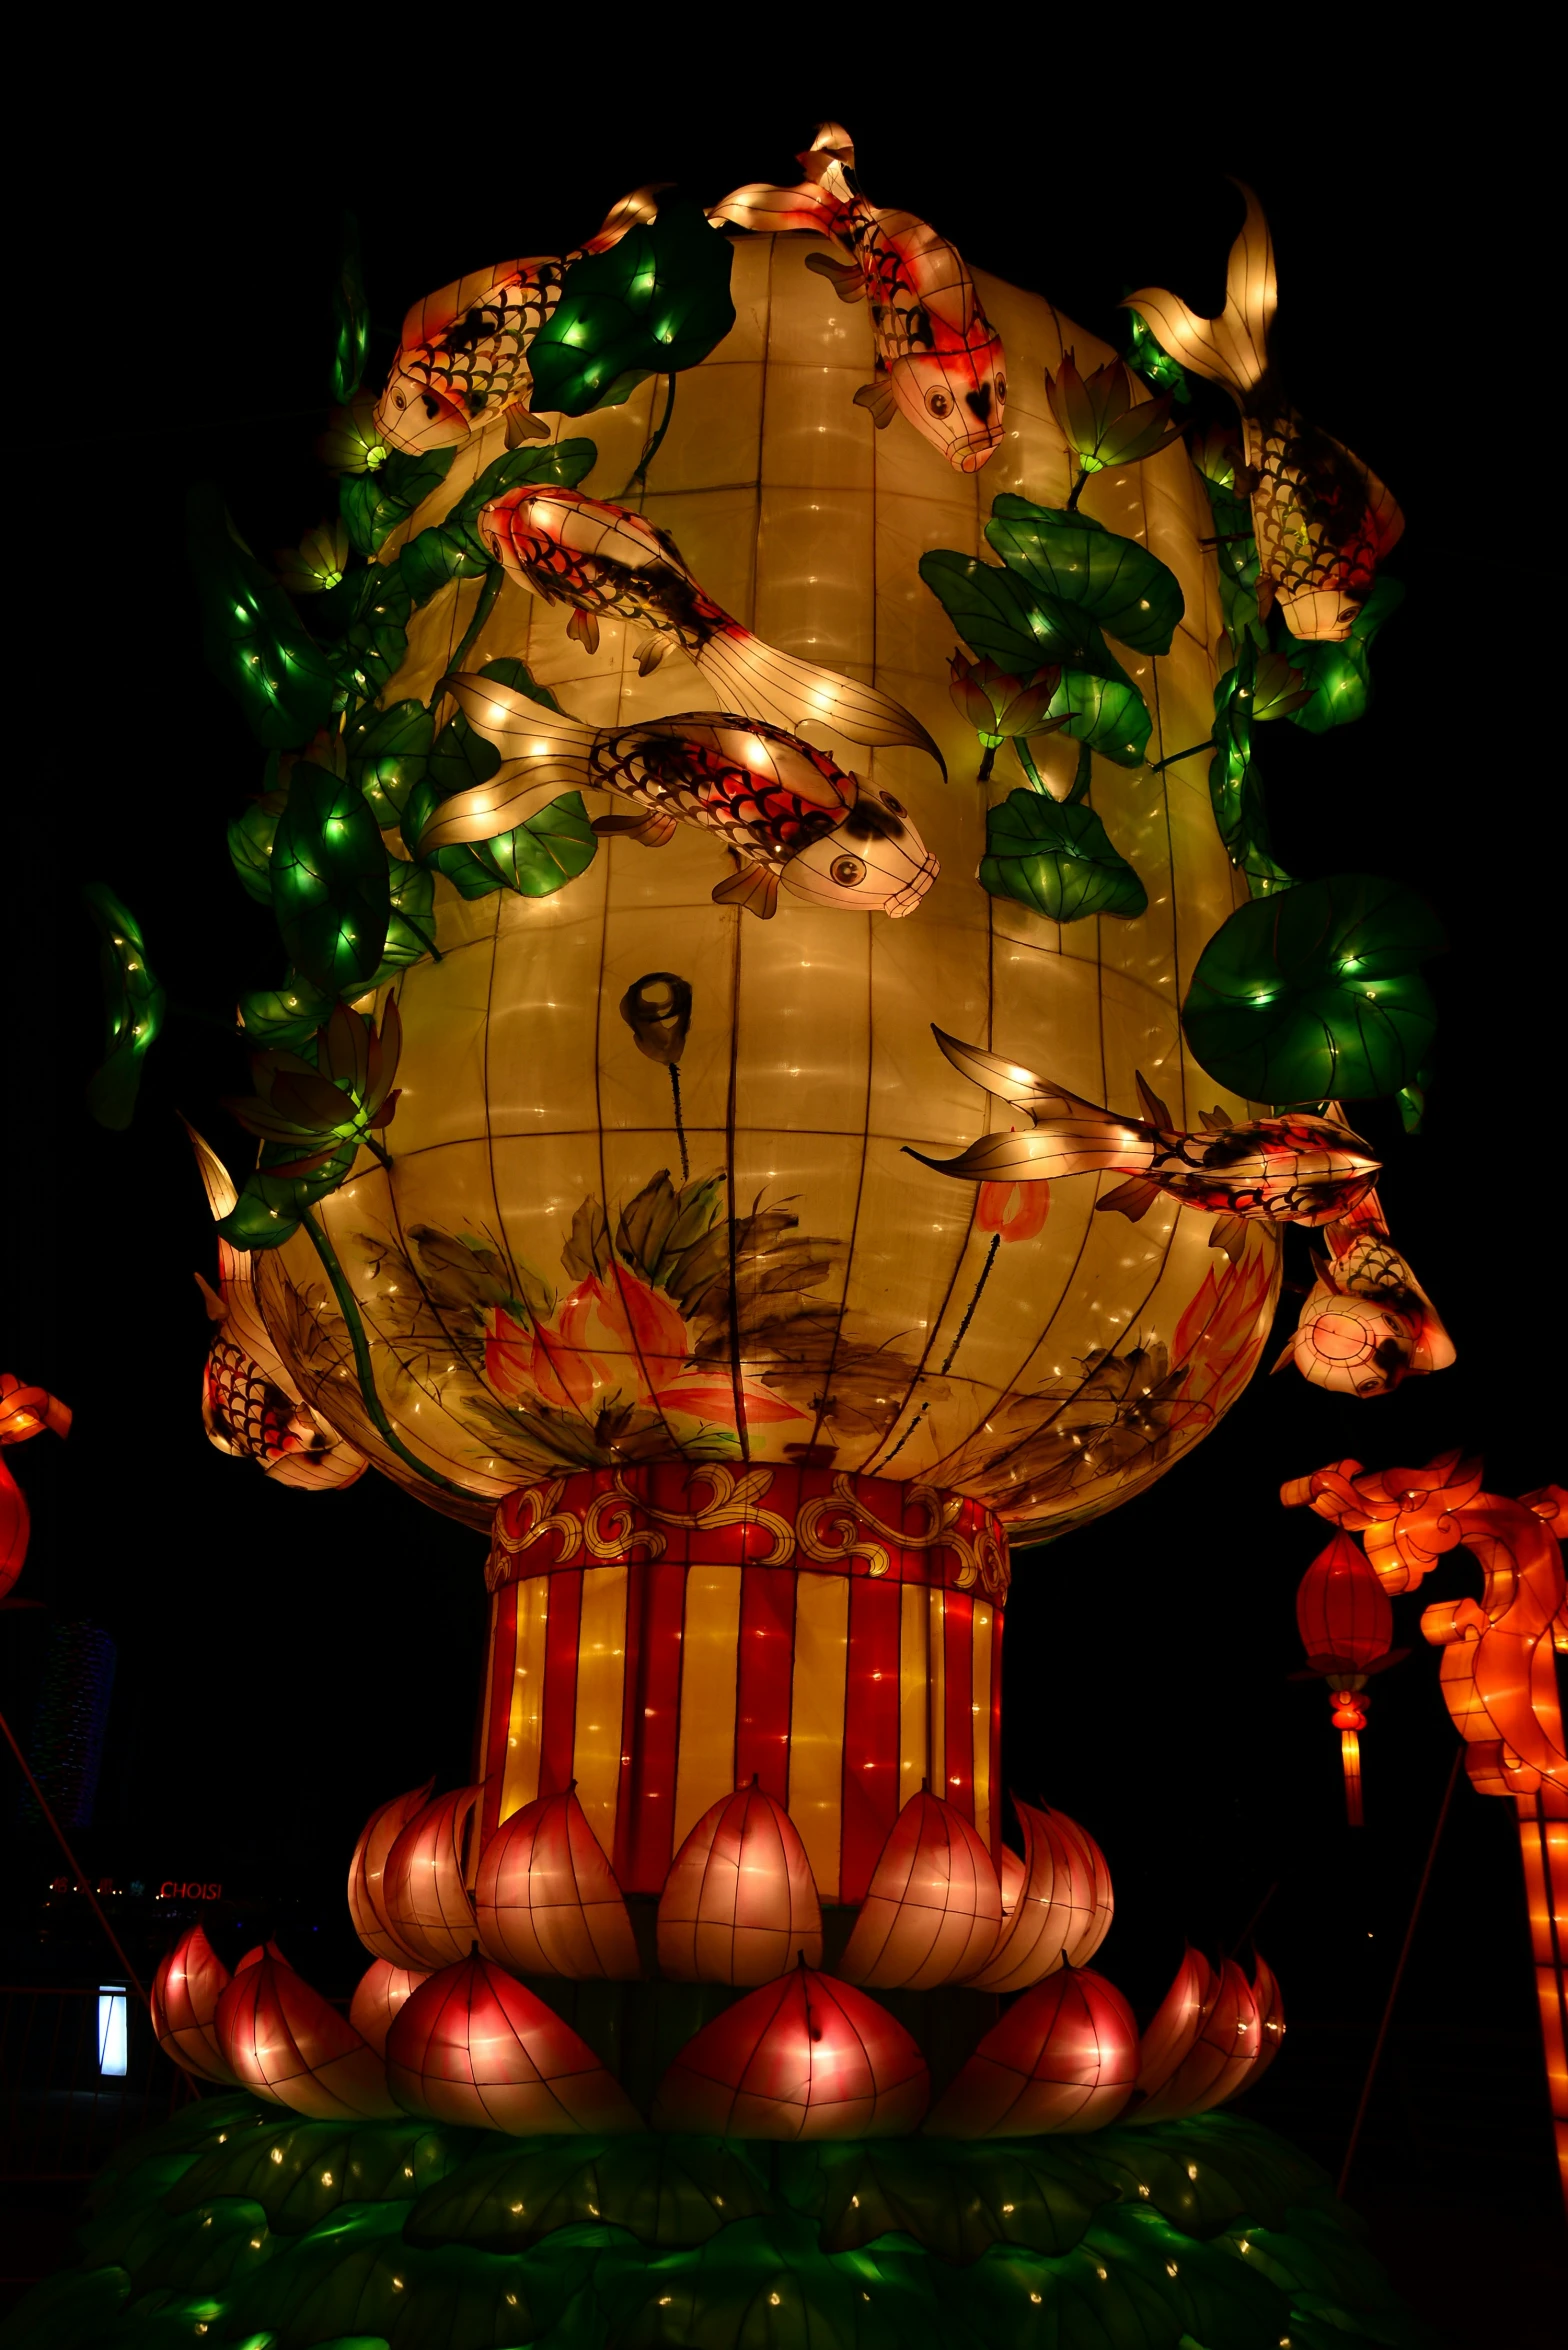 this is a large illuminated decoration with flowers